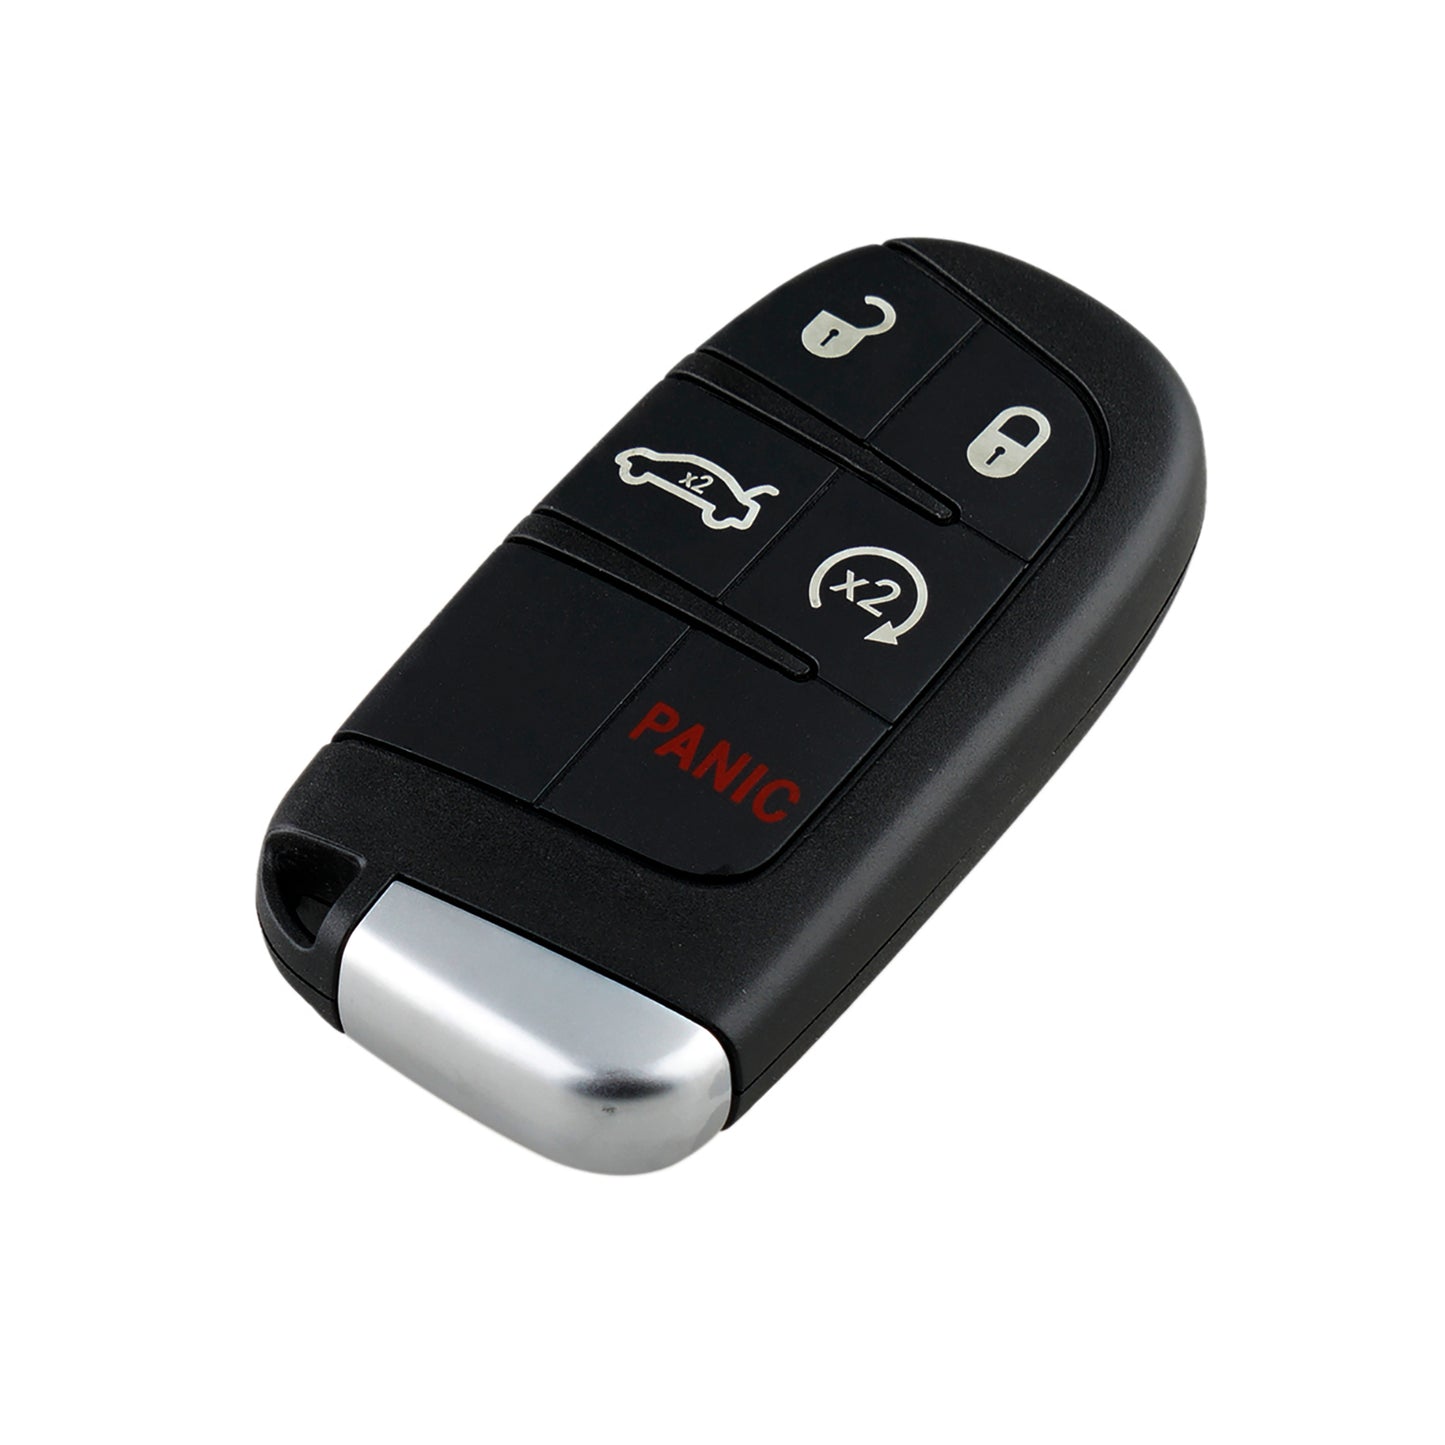 4+1 Buttons 433MHz Keyless Entry Fob Remote Car Key For 2019 - 2021 Dodge Challenger Charger FCC ID:M3M-40821302 SKU : J963